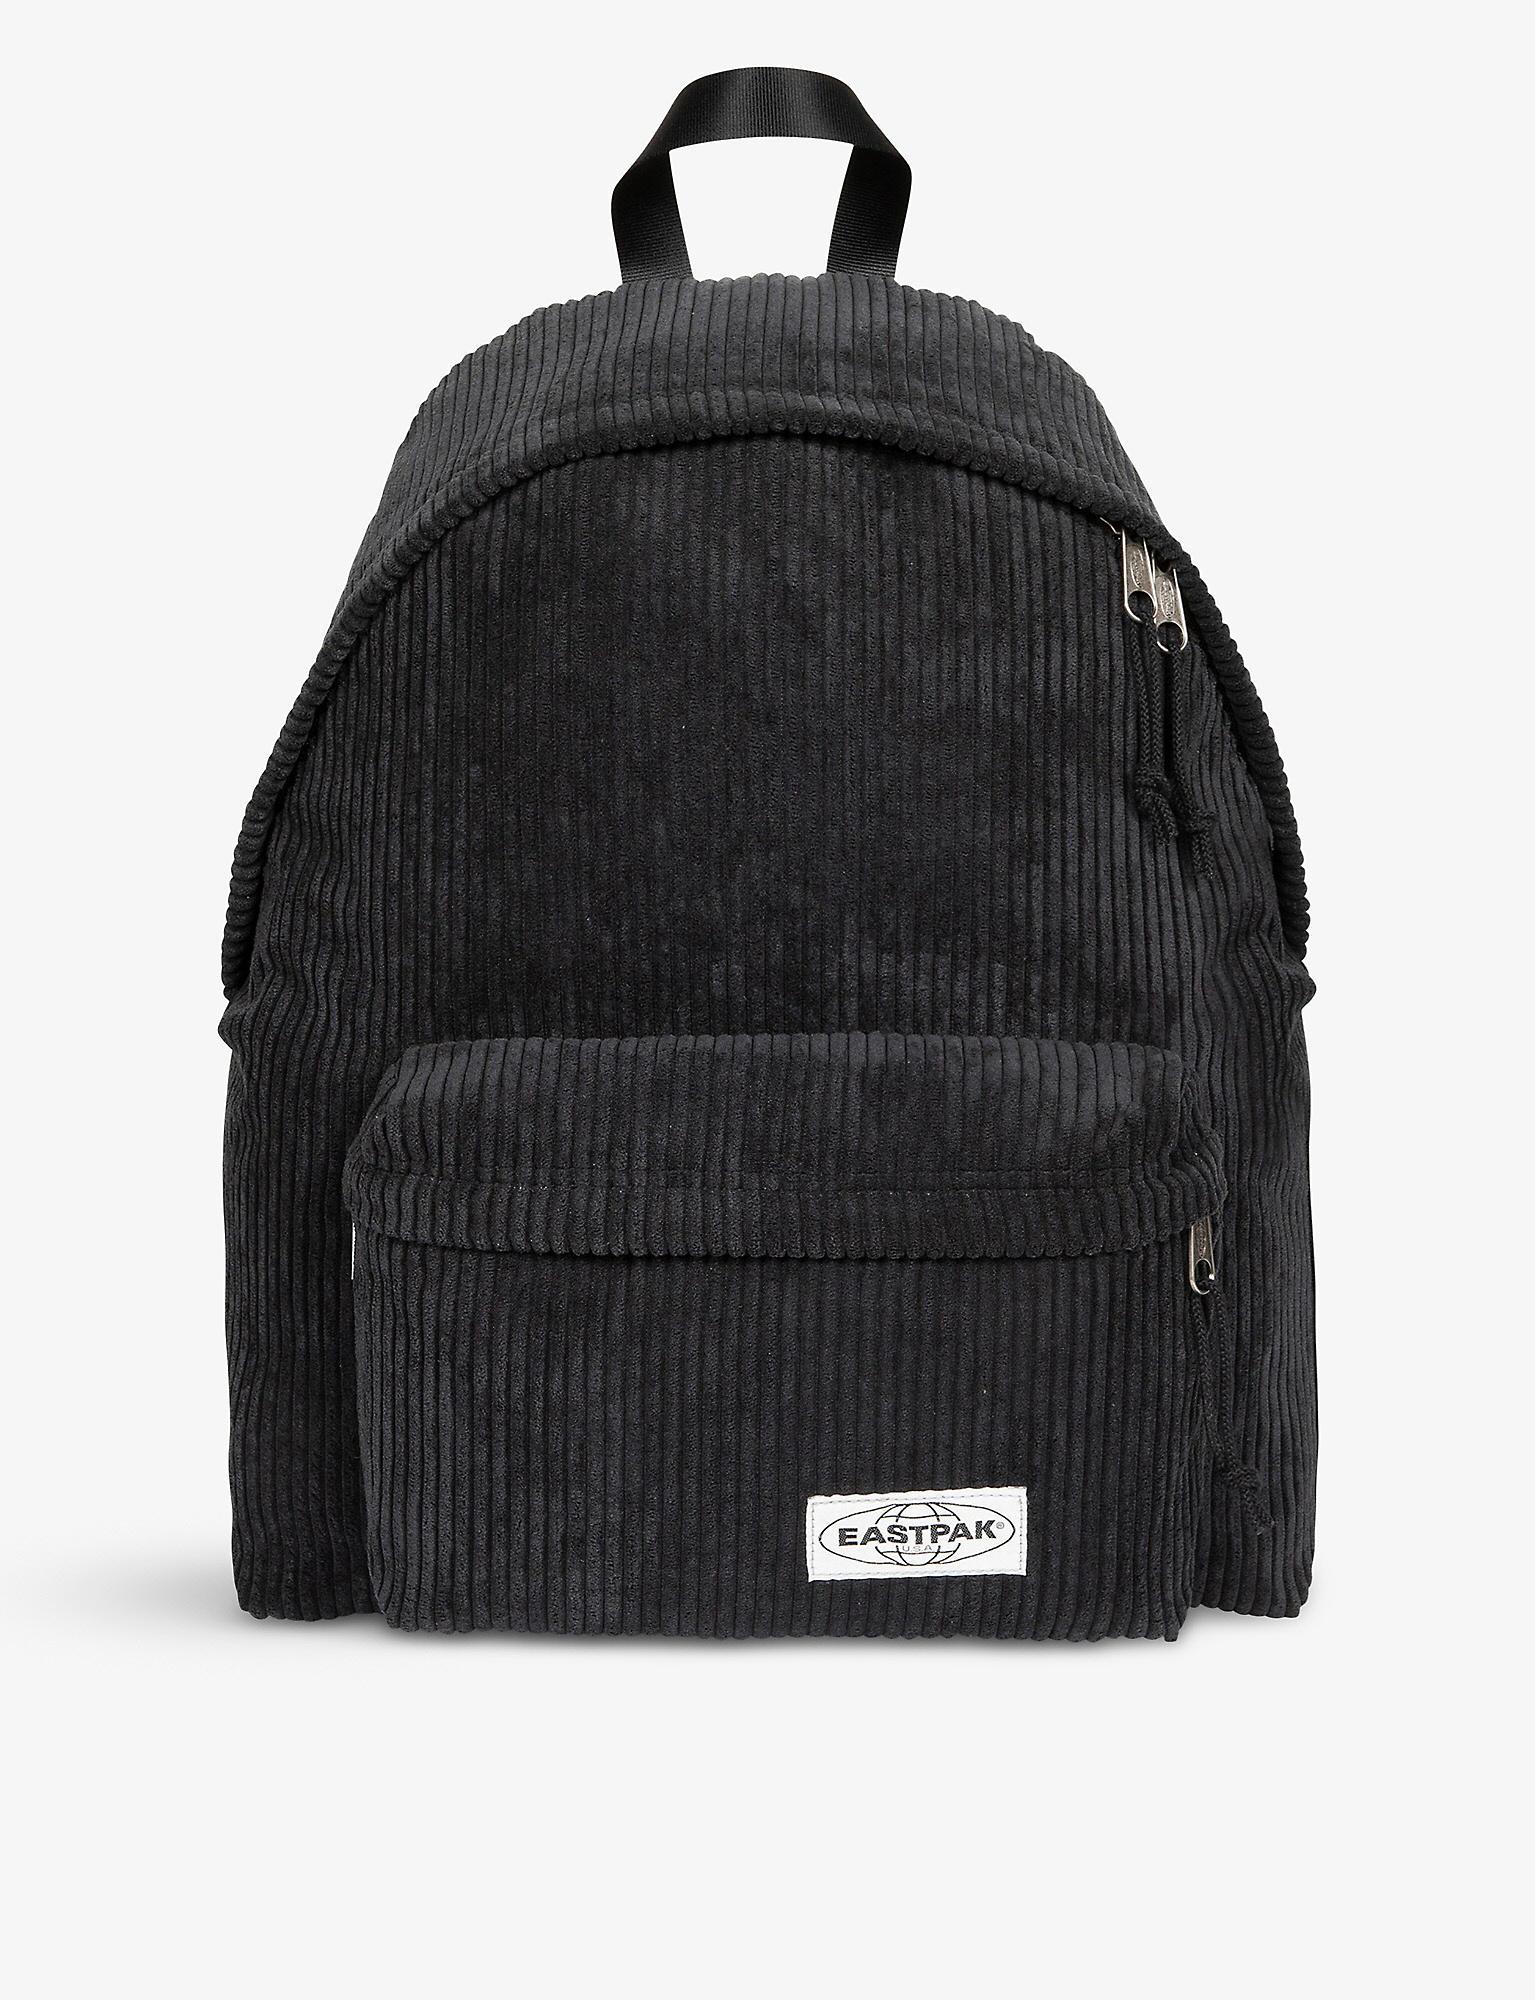 Eastpak Soft-rib Padded Large Woven Backpack in Black | Lyst